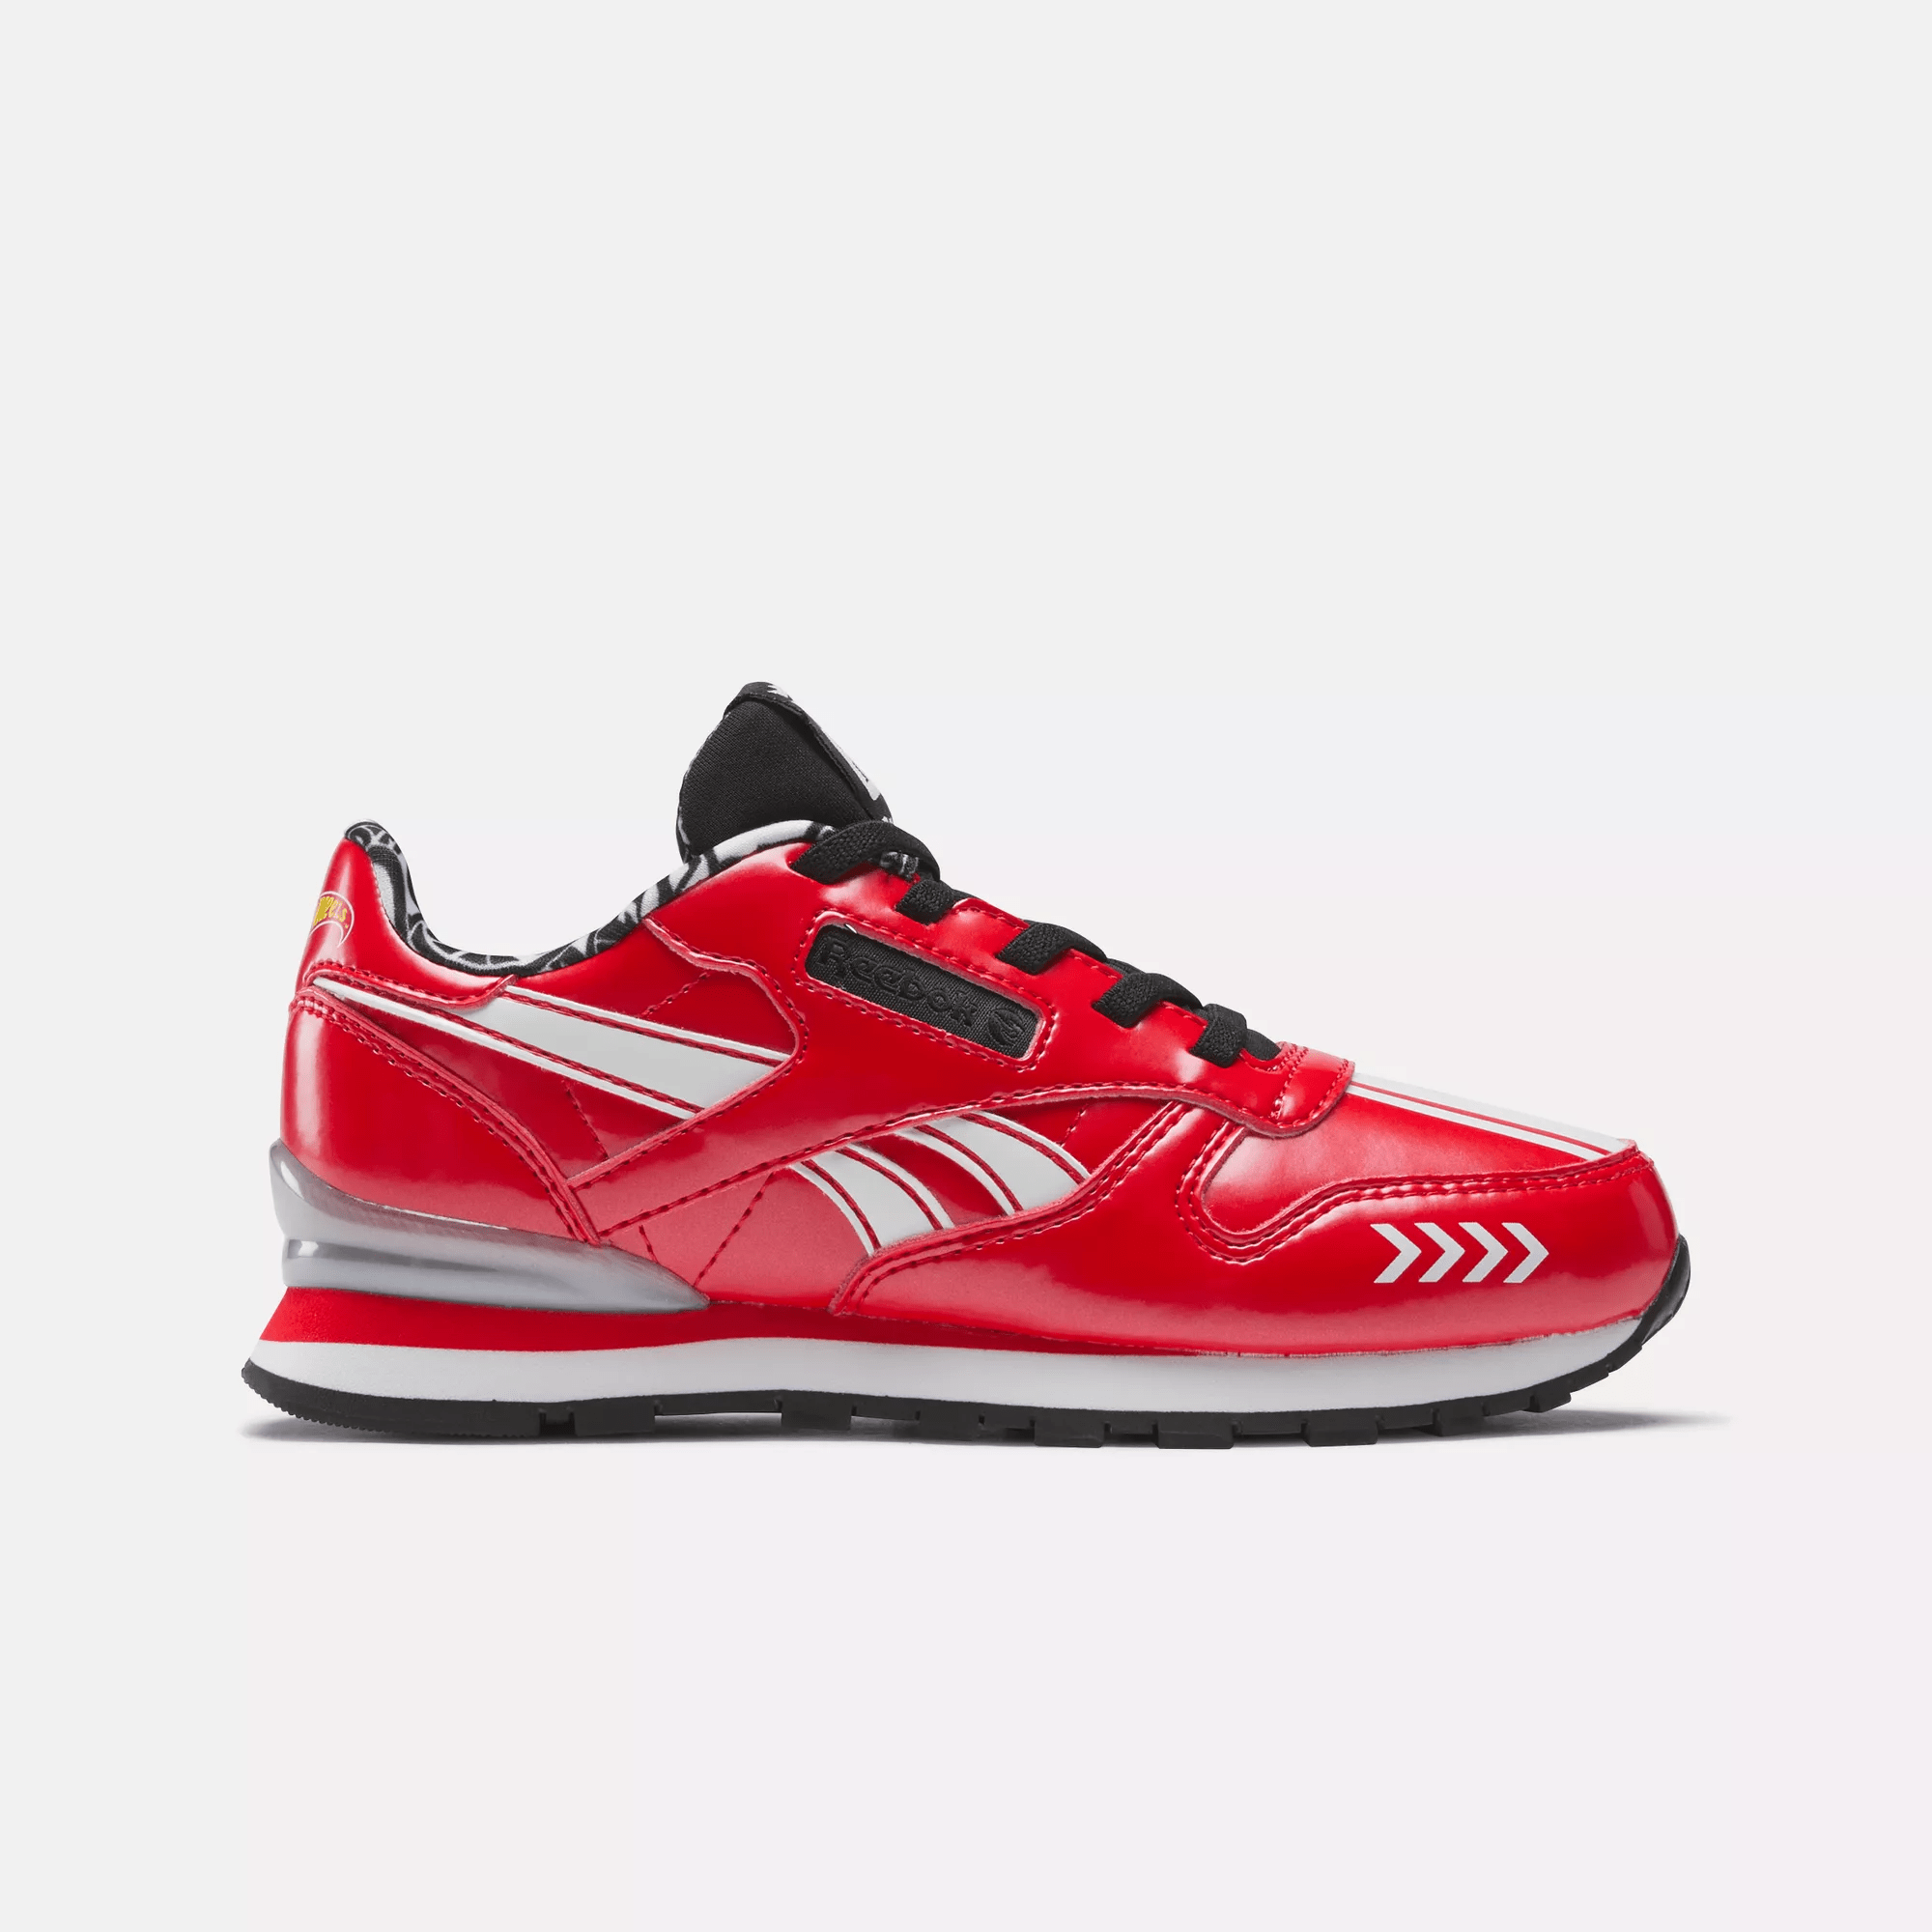 Reebok Unisex Hot Wheels Classic Leather Step N Flash Shoes In Red/black/white